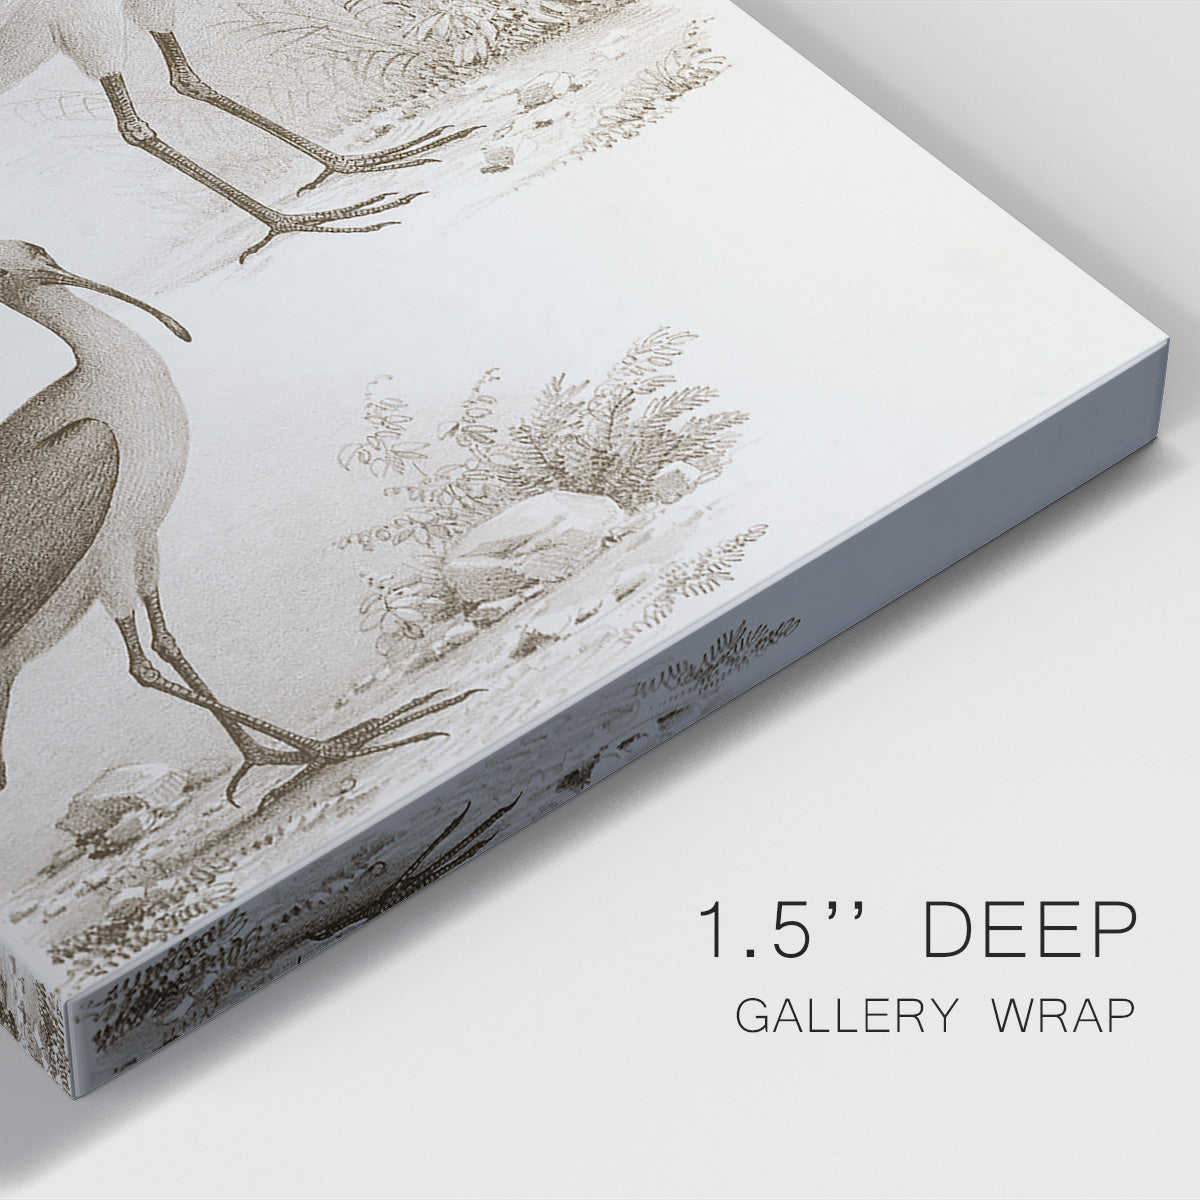 Sepia Water Birds II Premium Gallery Wrapped Canvas - Ready to Hang